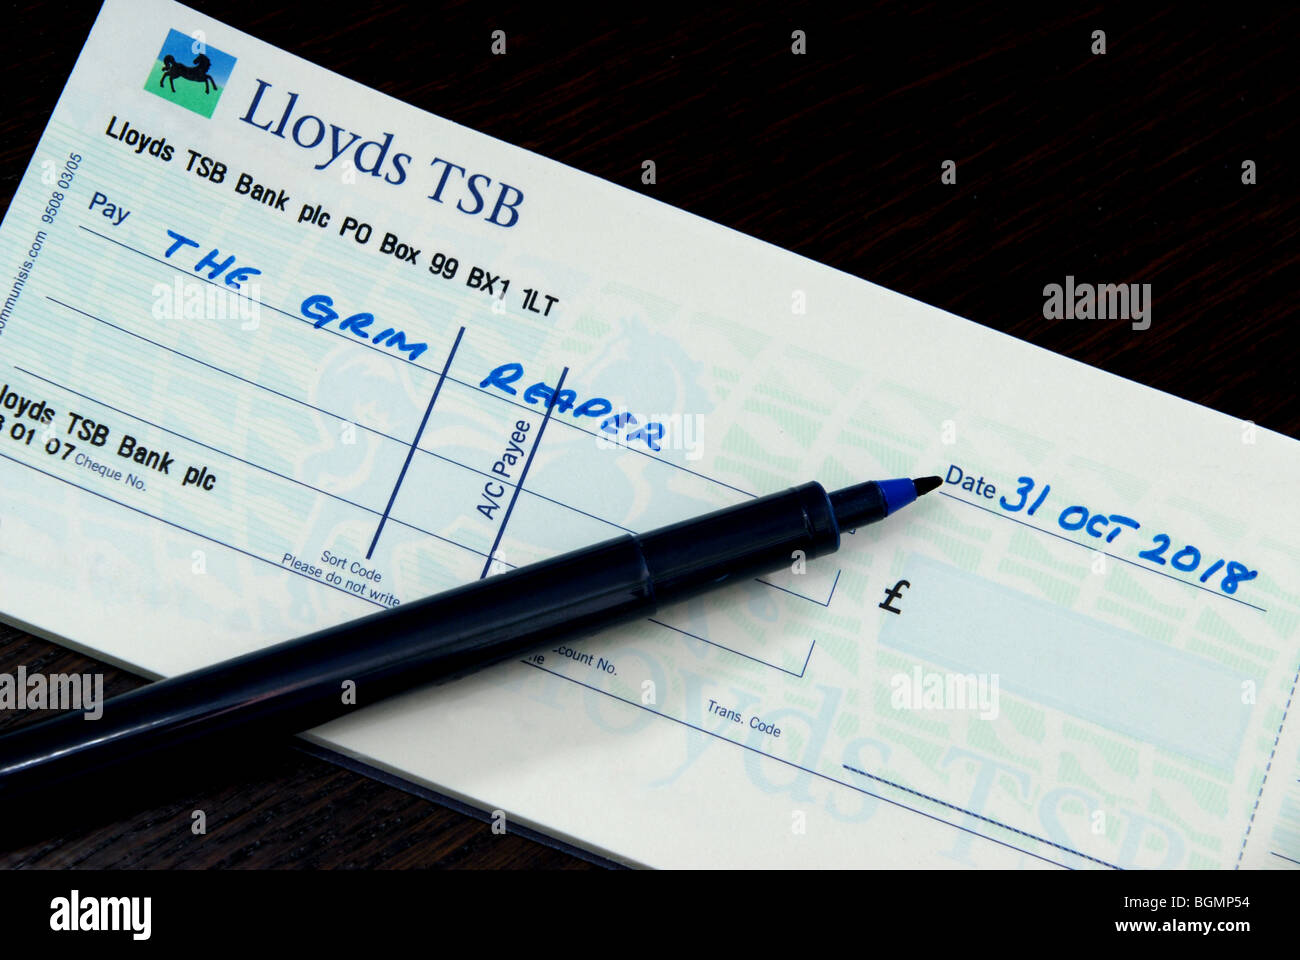 Cheque to the Grim Reaper dated 31 Oct 2018 to illustrate the potential last date for cheques as acceptable form of payment Stock Photo